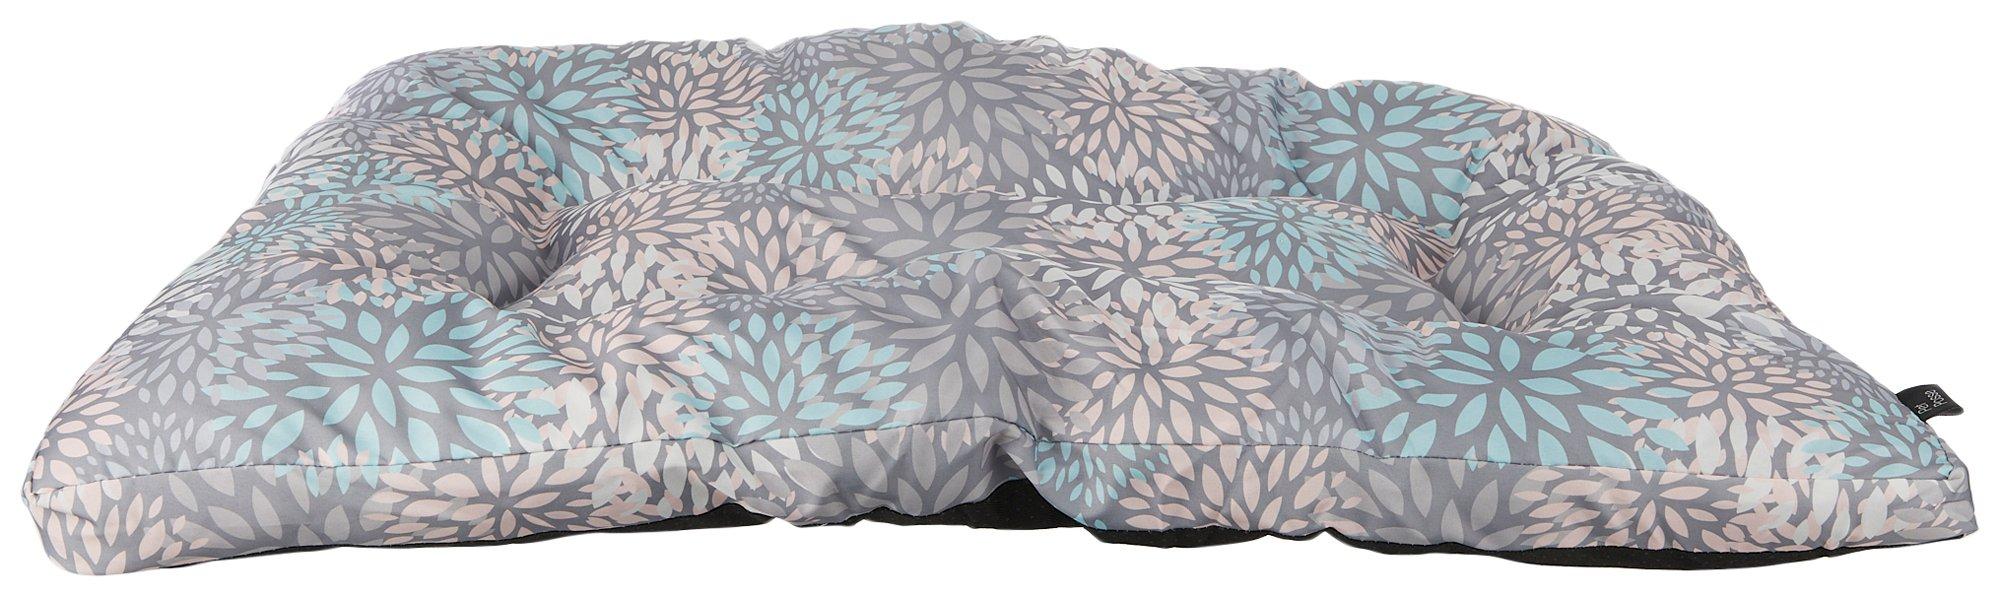 27x36 Decorative Tufted Dog Bed